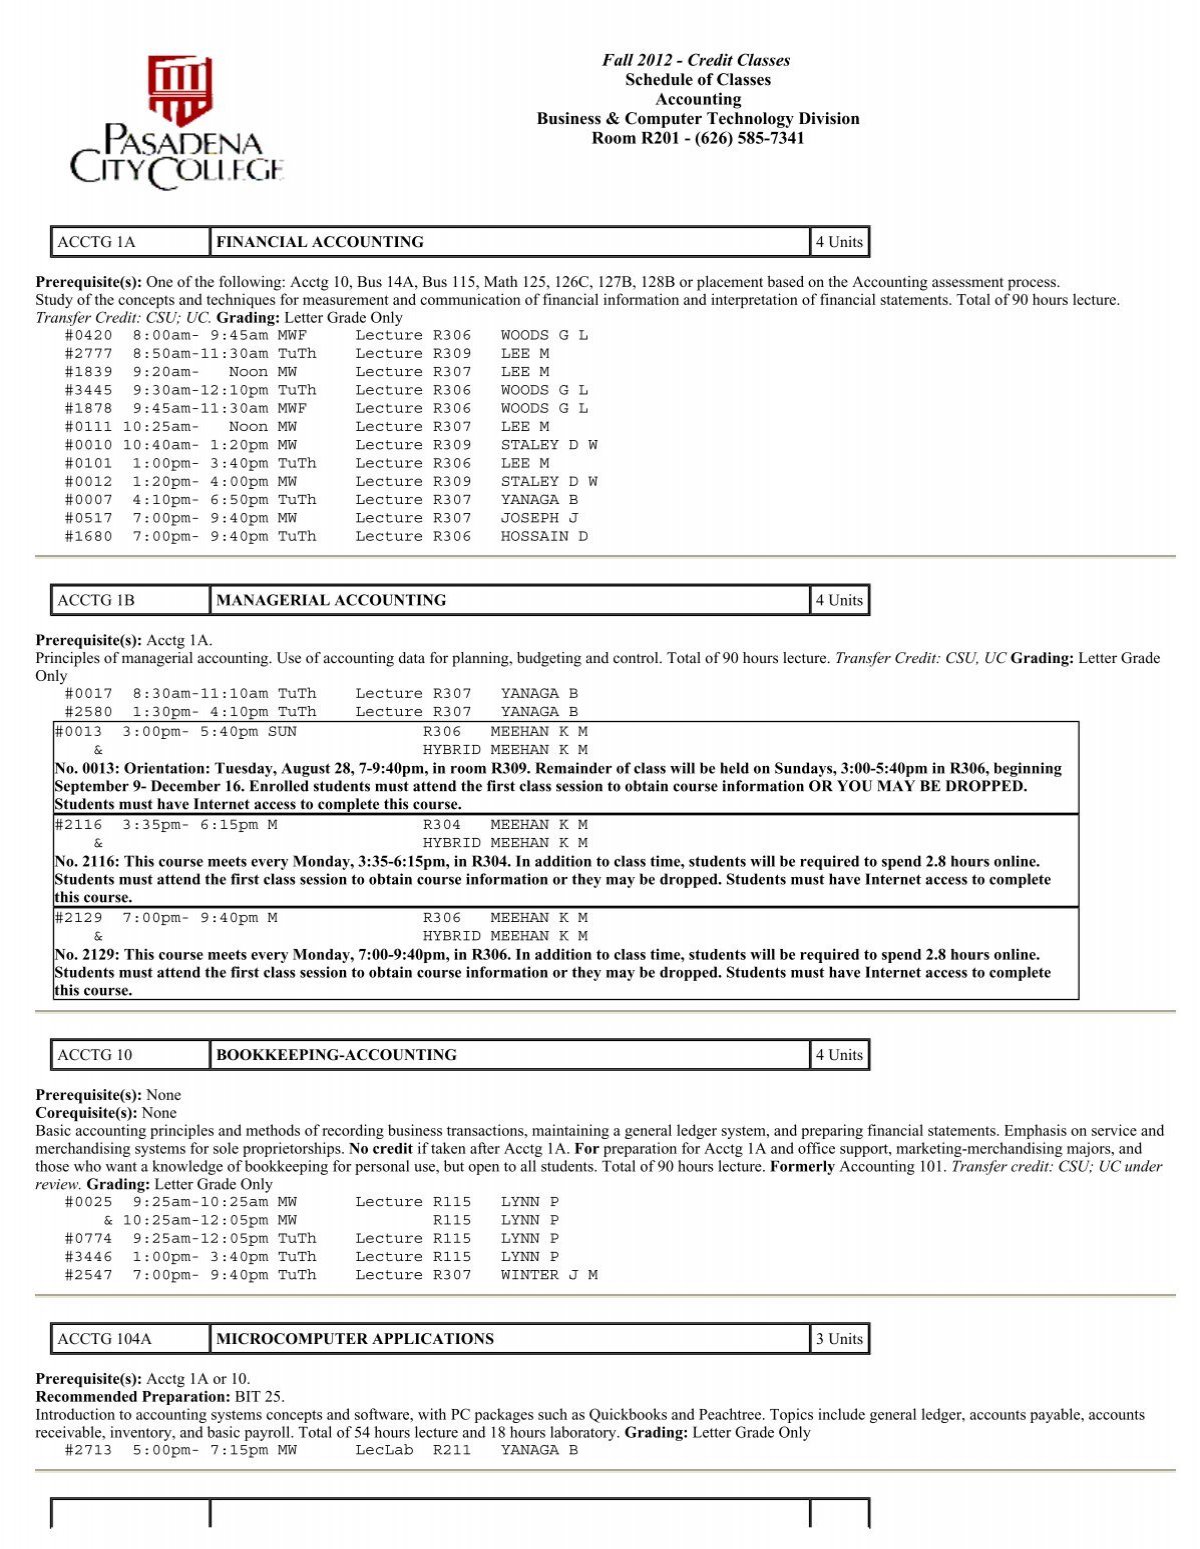 Fall 2012 - Credit Classes Schedule of Classes Accounting